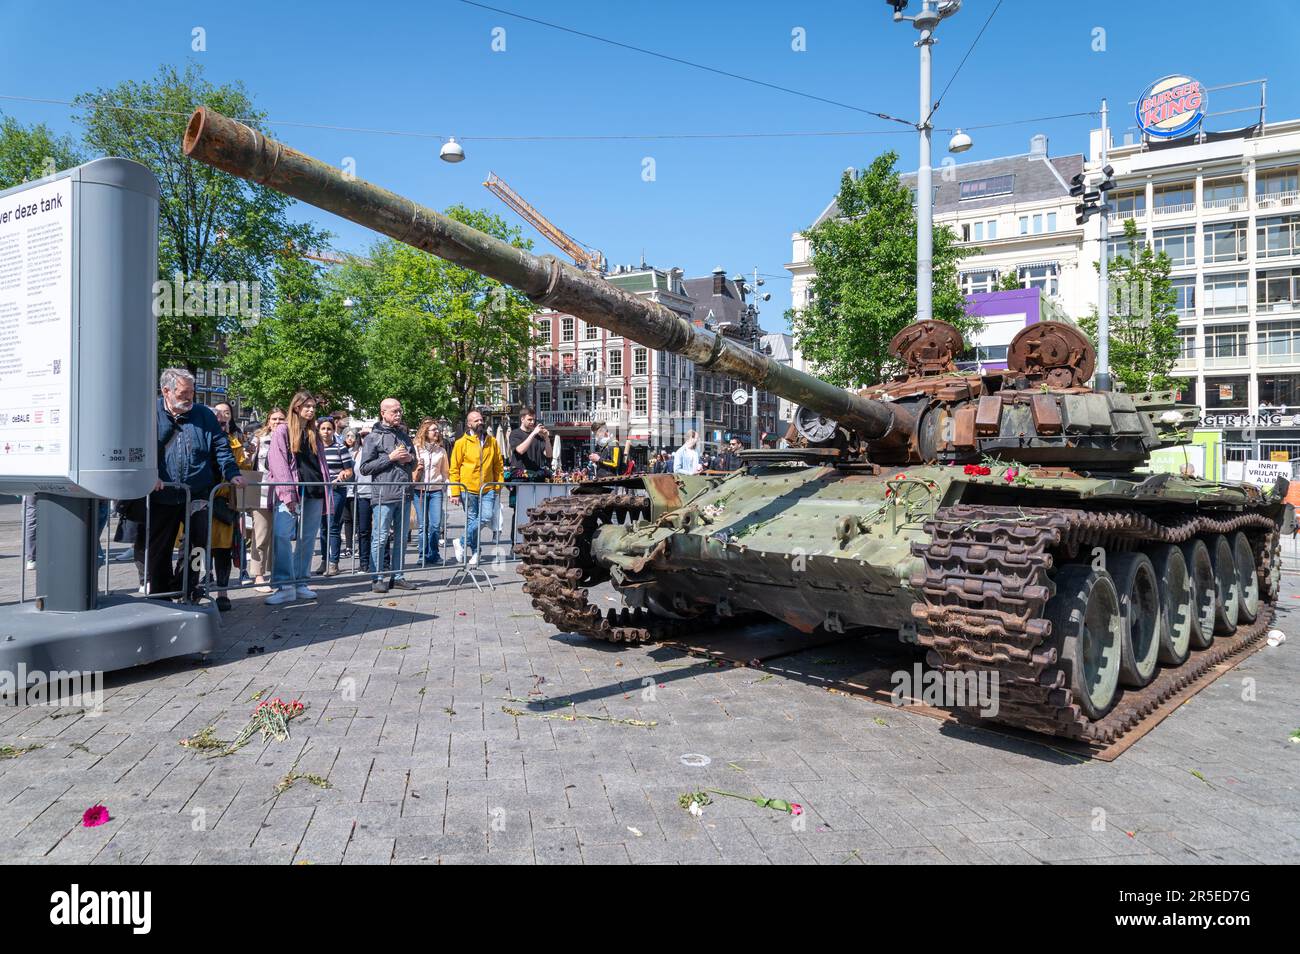 Wrecked Russian tank in Leidseplein square, Amsterdam Stock Photo